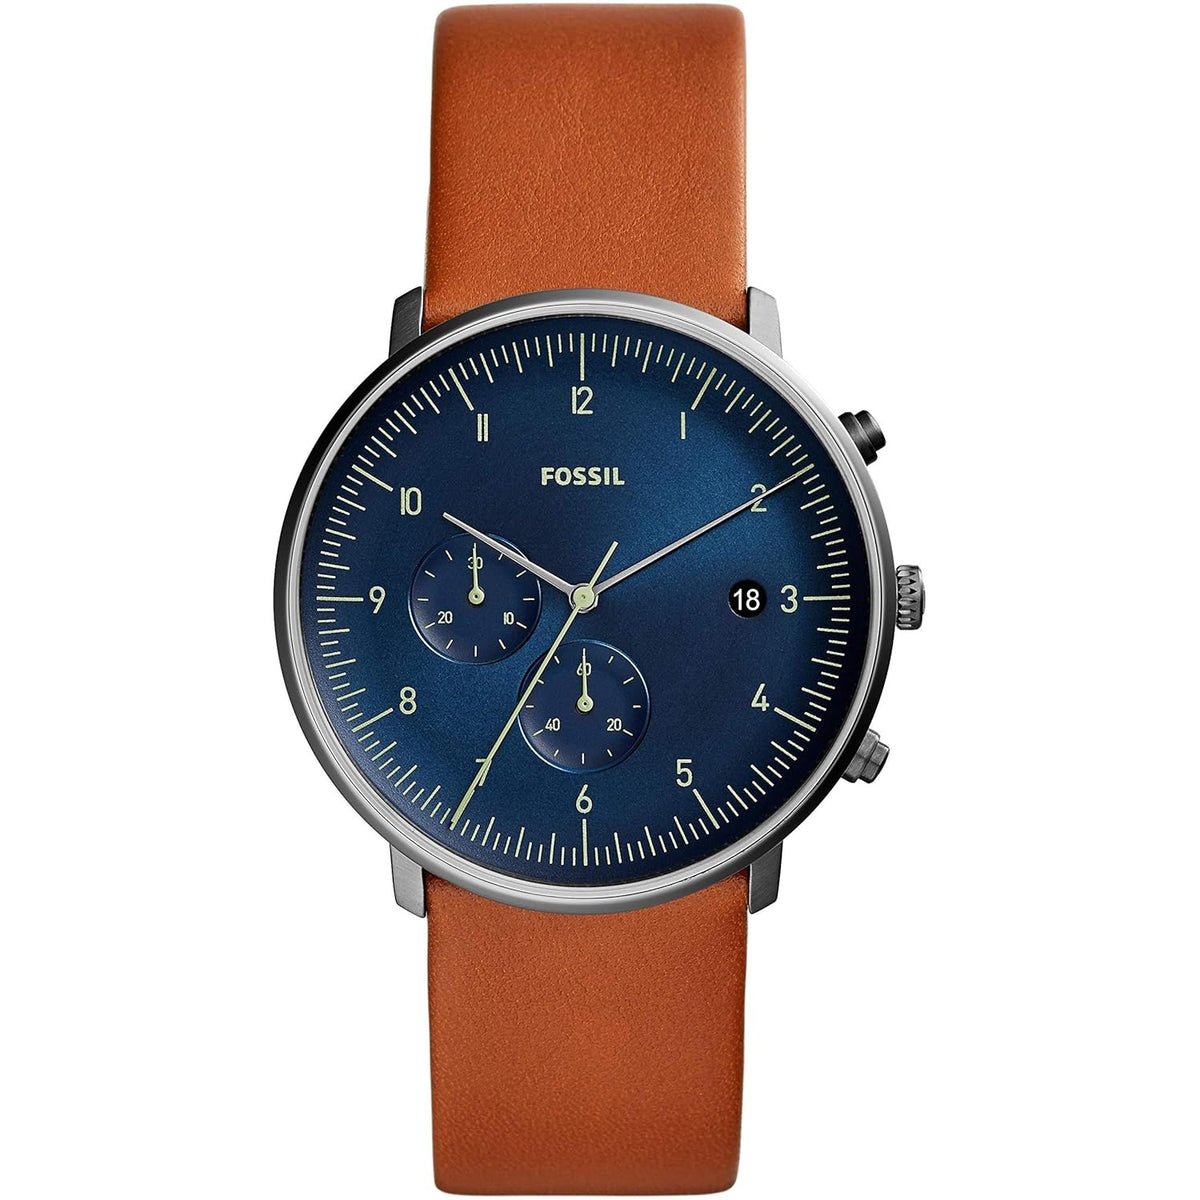 Fossil Men's Watch Analog, Chase Timer Chronograph Blue Dial Brown Leather Band, FW-FS5486